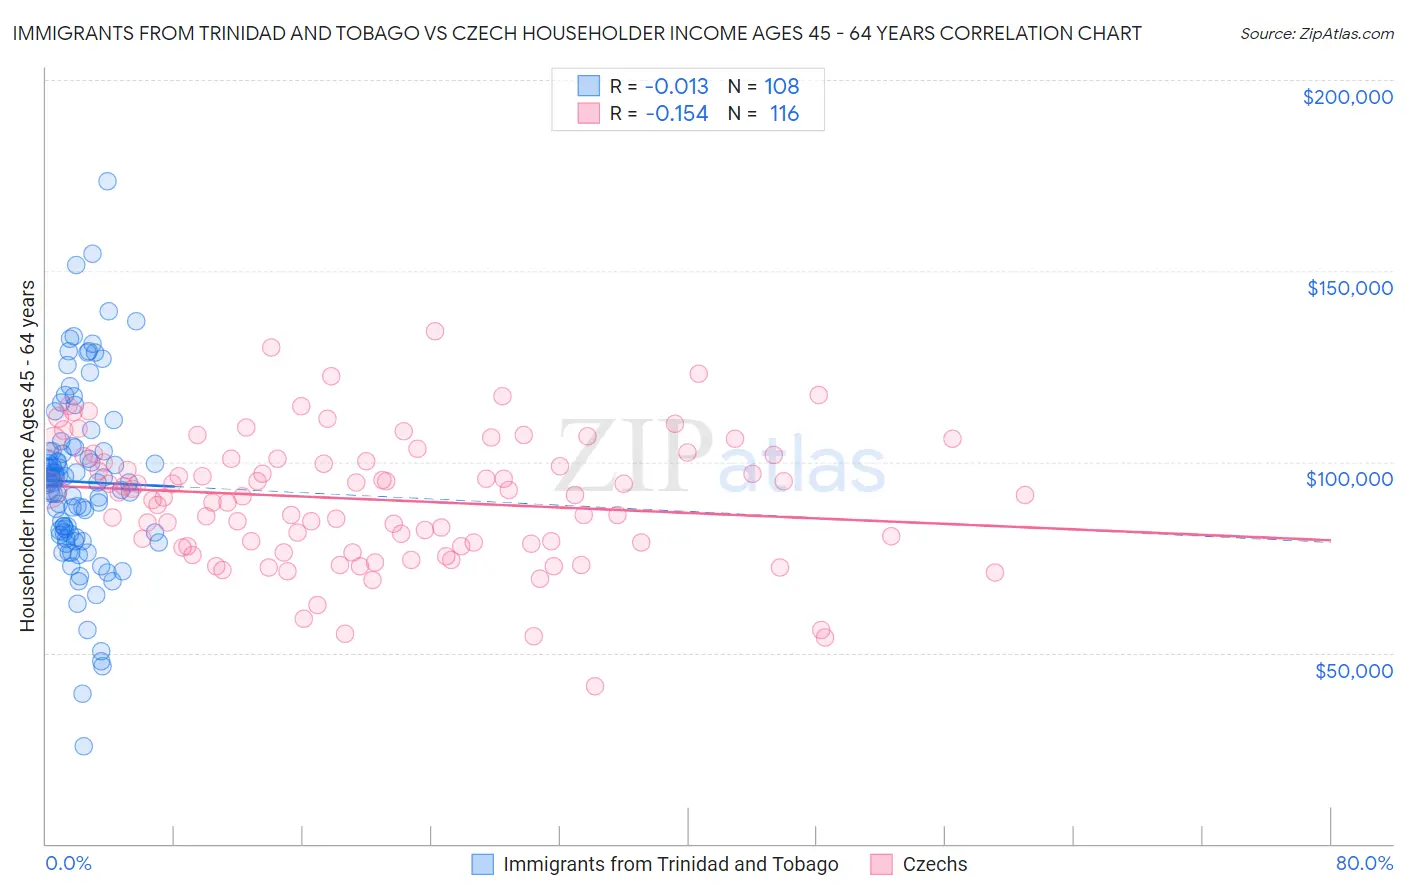 Immigrants from Trinidad and Tobago vs Czech Householder Income Ages 45 - 64 years